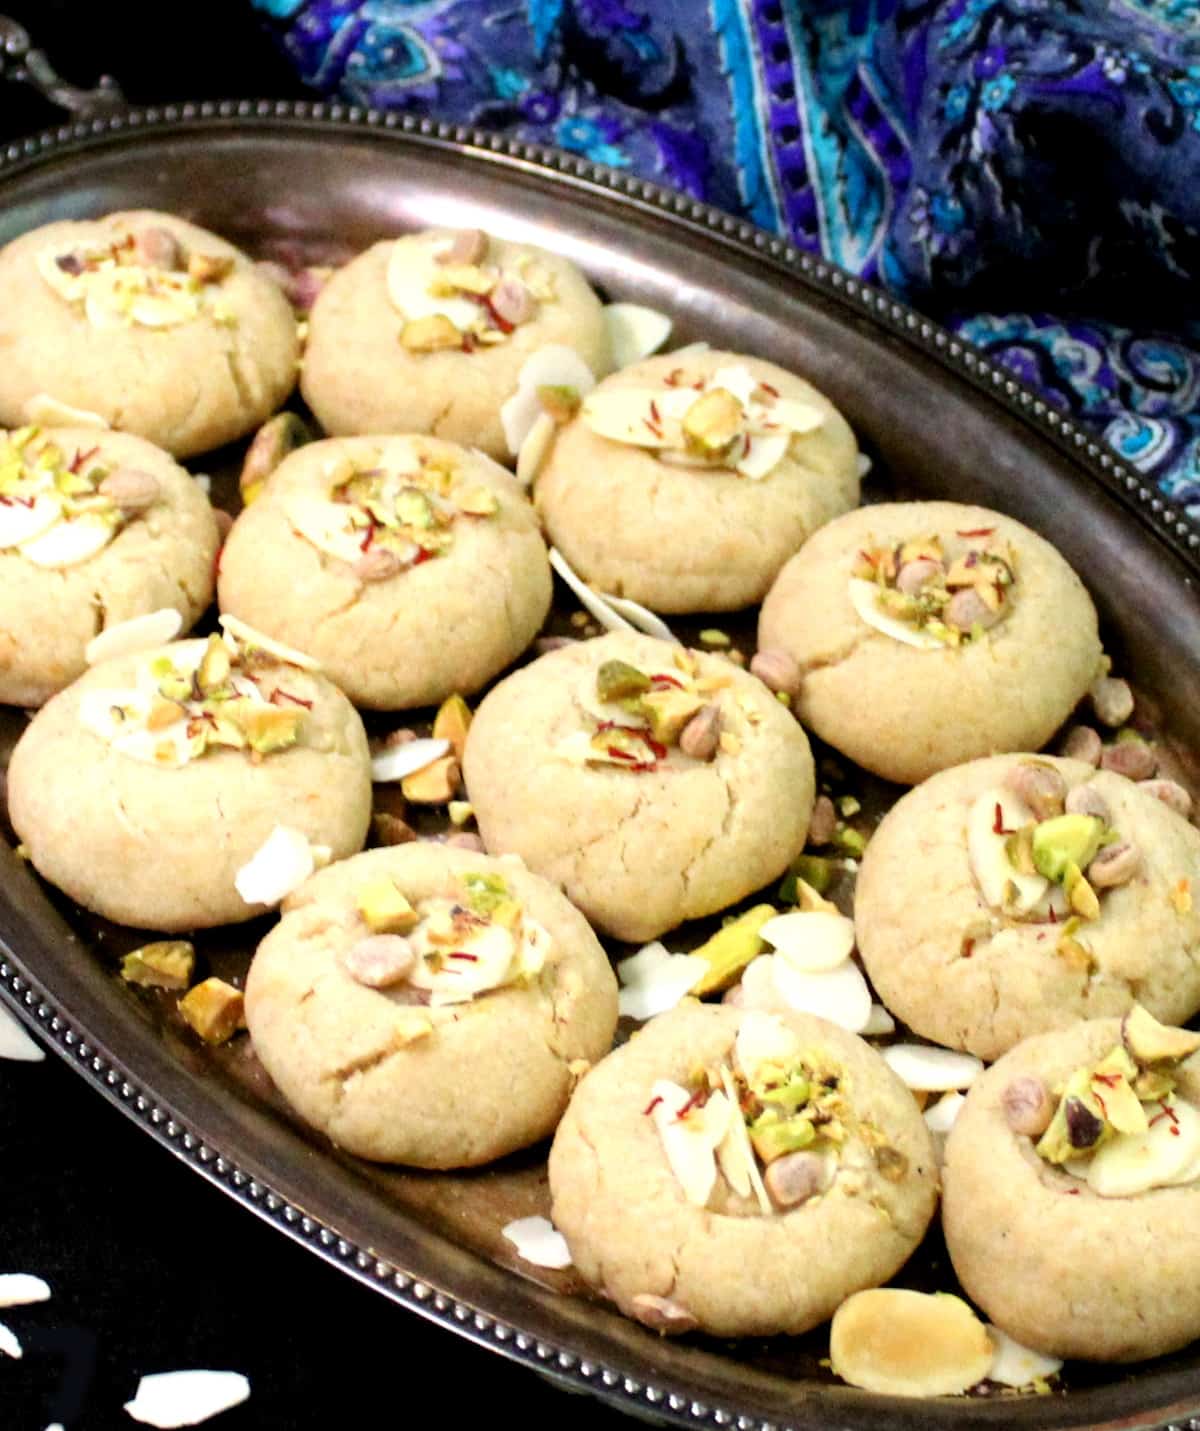 A close up shot of several vegan nankhatai biscuits on a silver plate with pistachios, almonds, saffron and other garnishes.